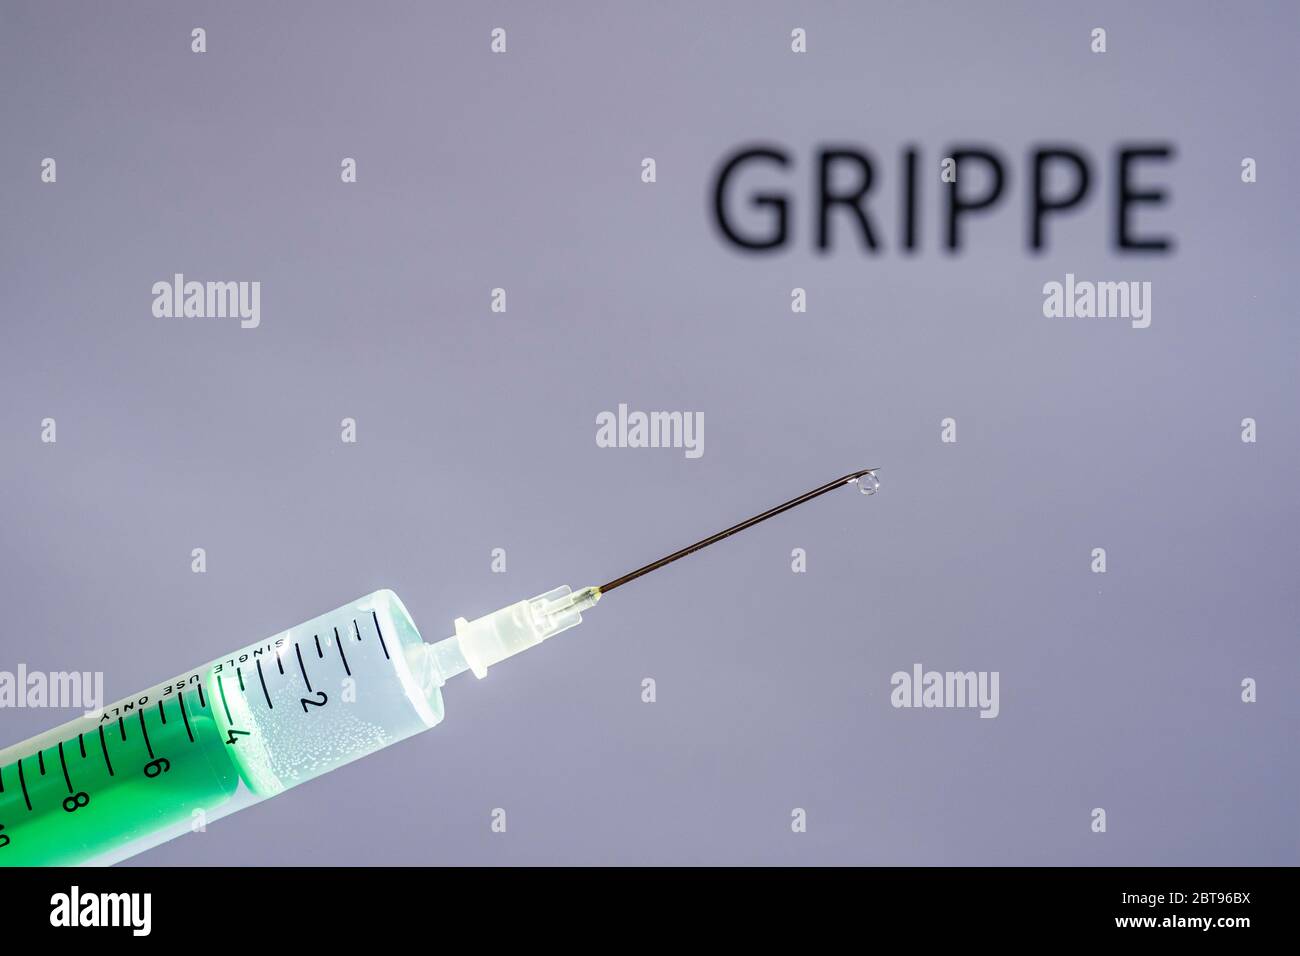 This photo illustration shows a disposable syringe with hypodermic needle, GRIPPE written on a grey board behind Stock Photo